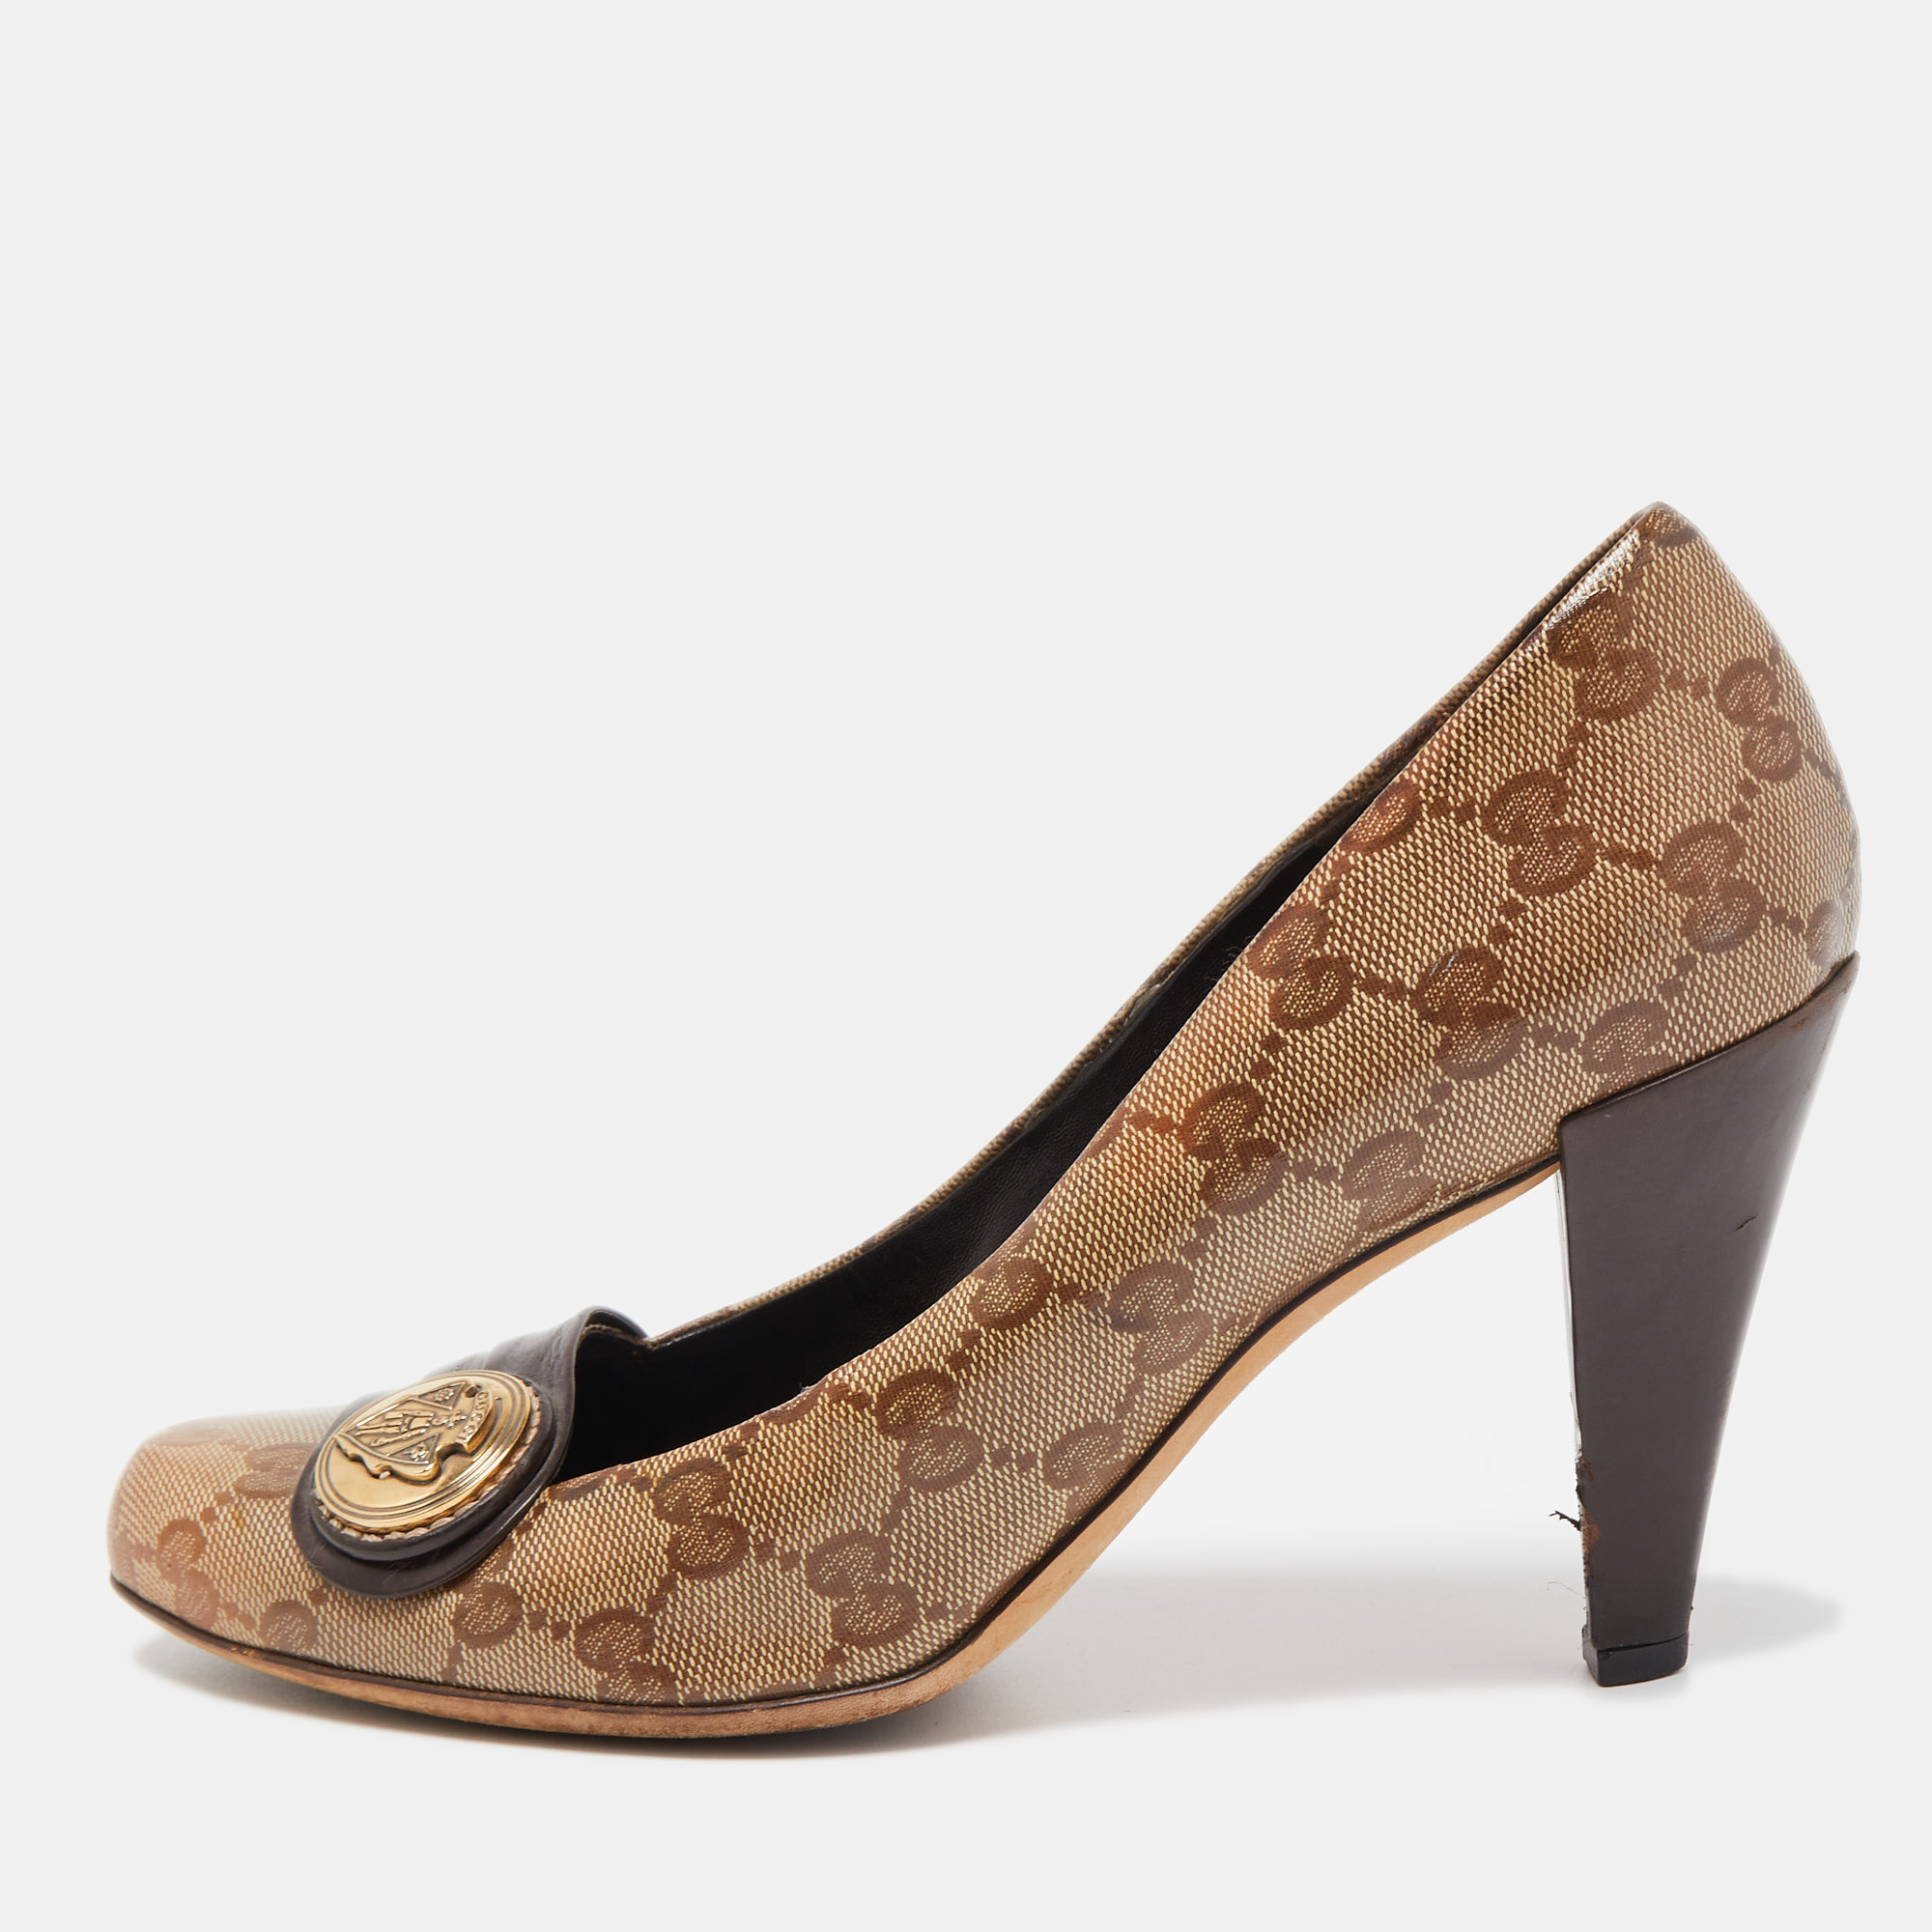 Gucci brown/beige gg supreme canvas and leather hysteria pumps size 39